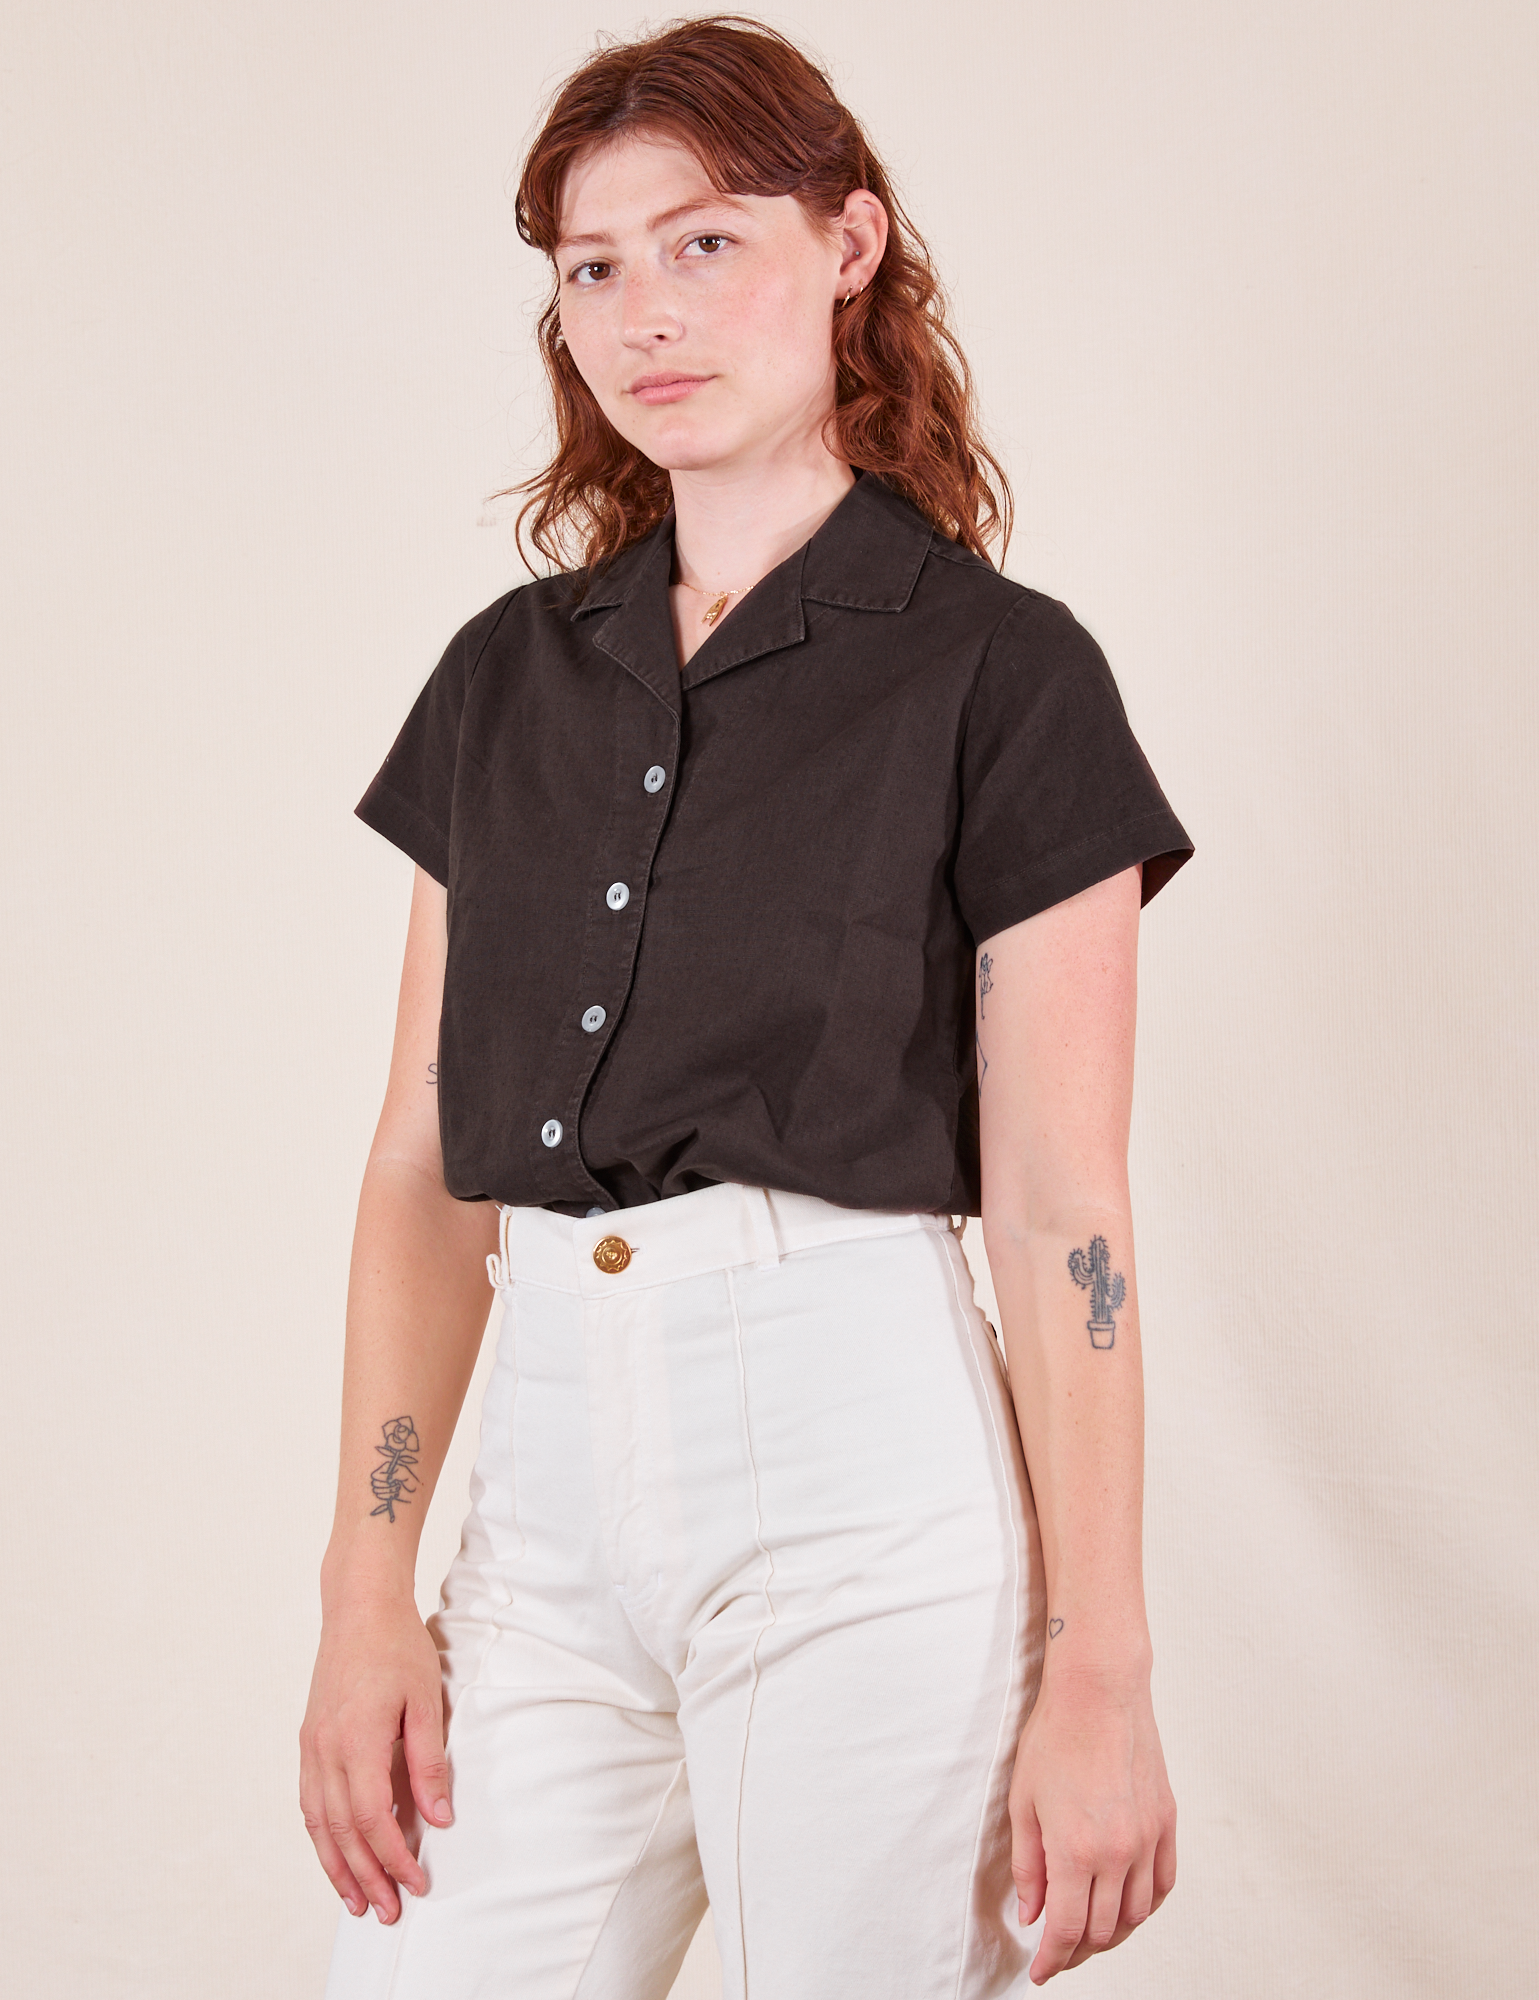 Alex is wearing P Pantry Button-Up in Espresso Brown tucked into vintage off-white Western Pants